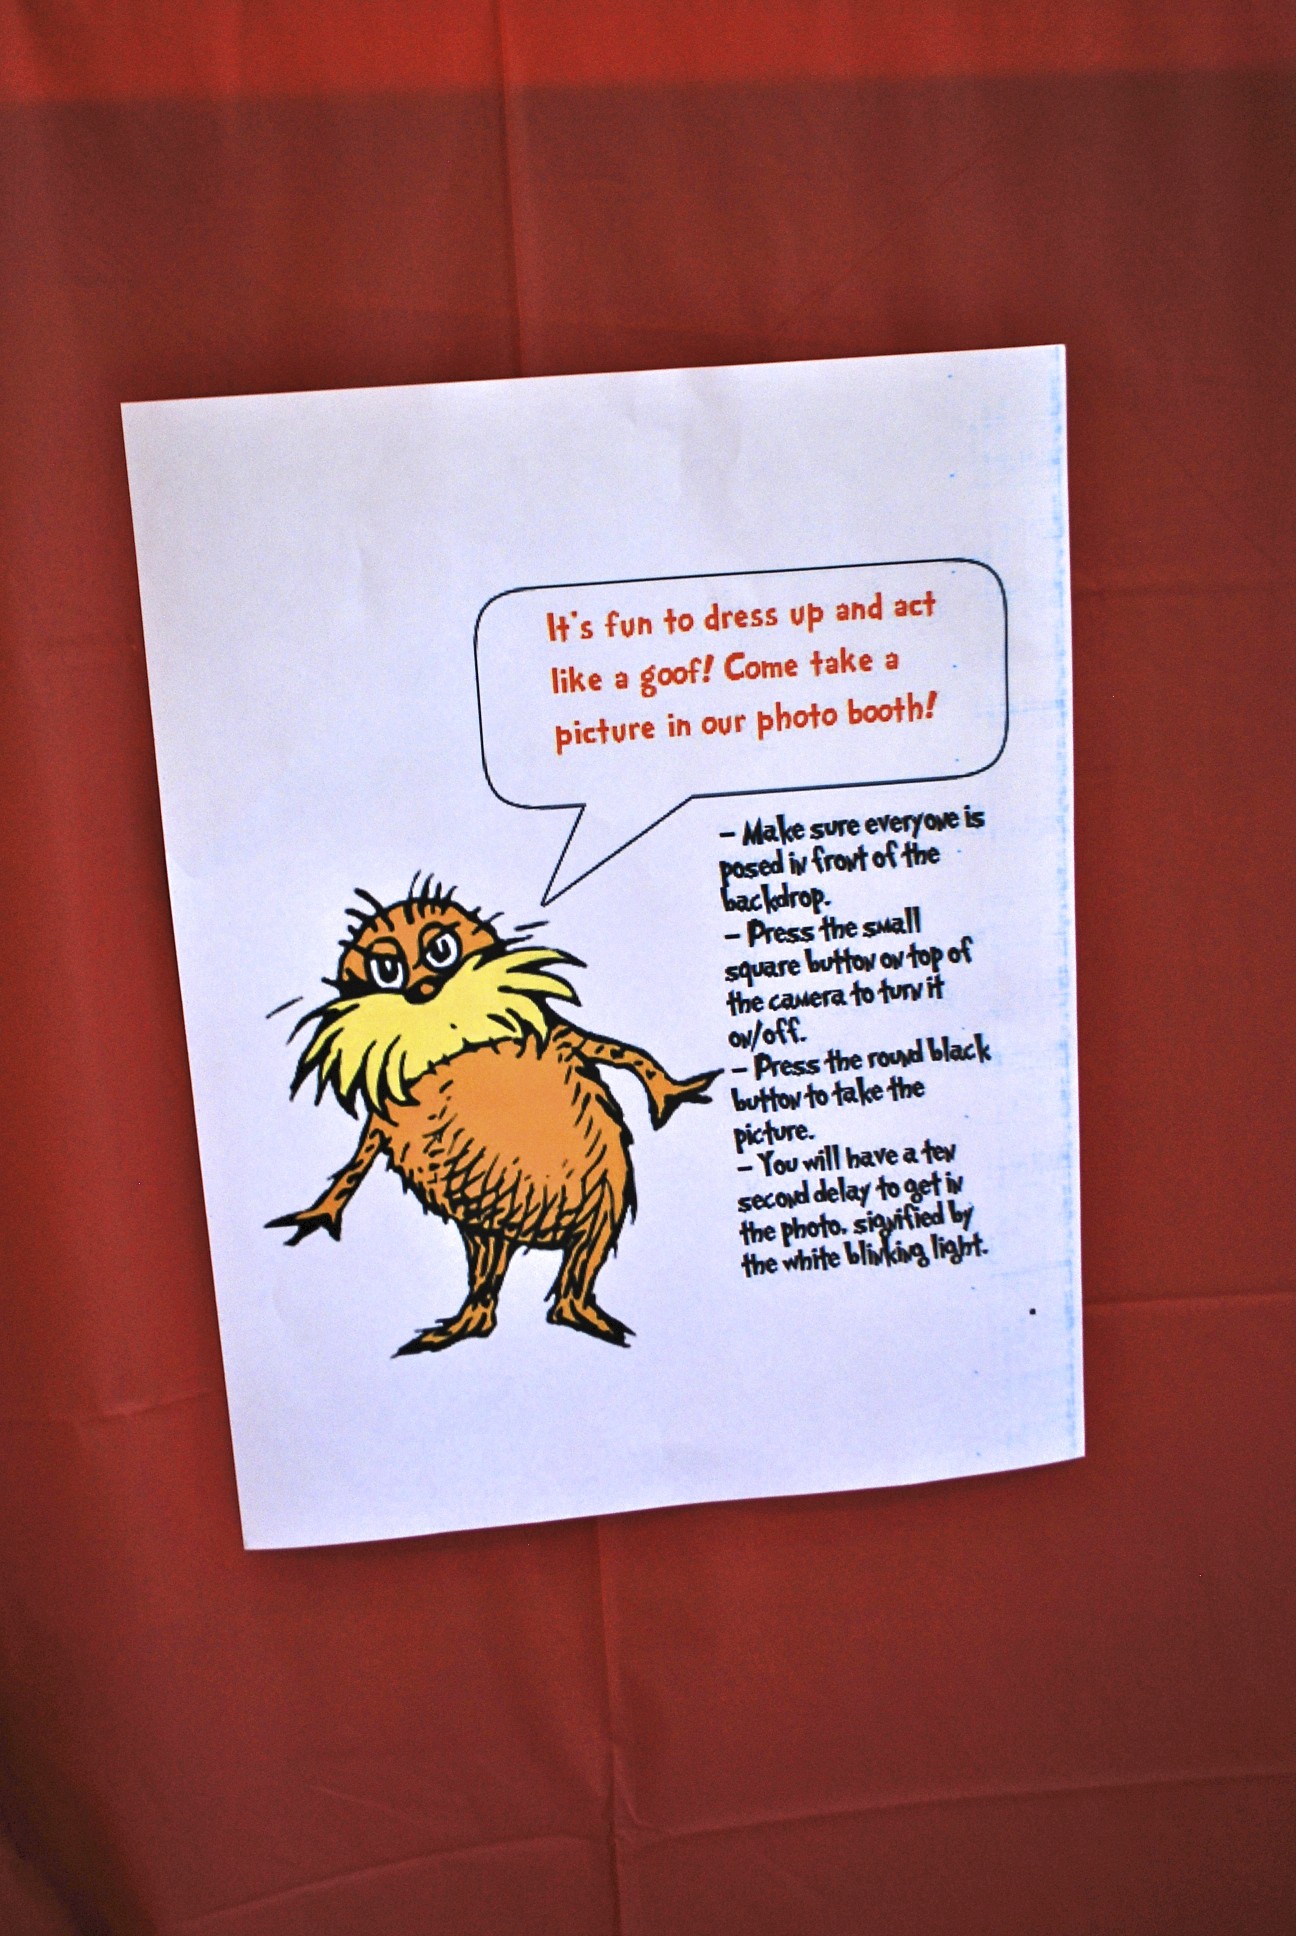 Dr. Seuss Photo Booth Instructions